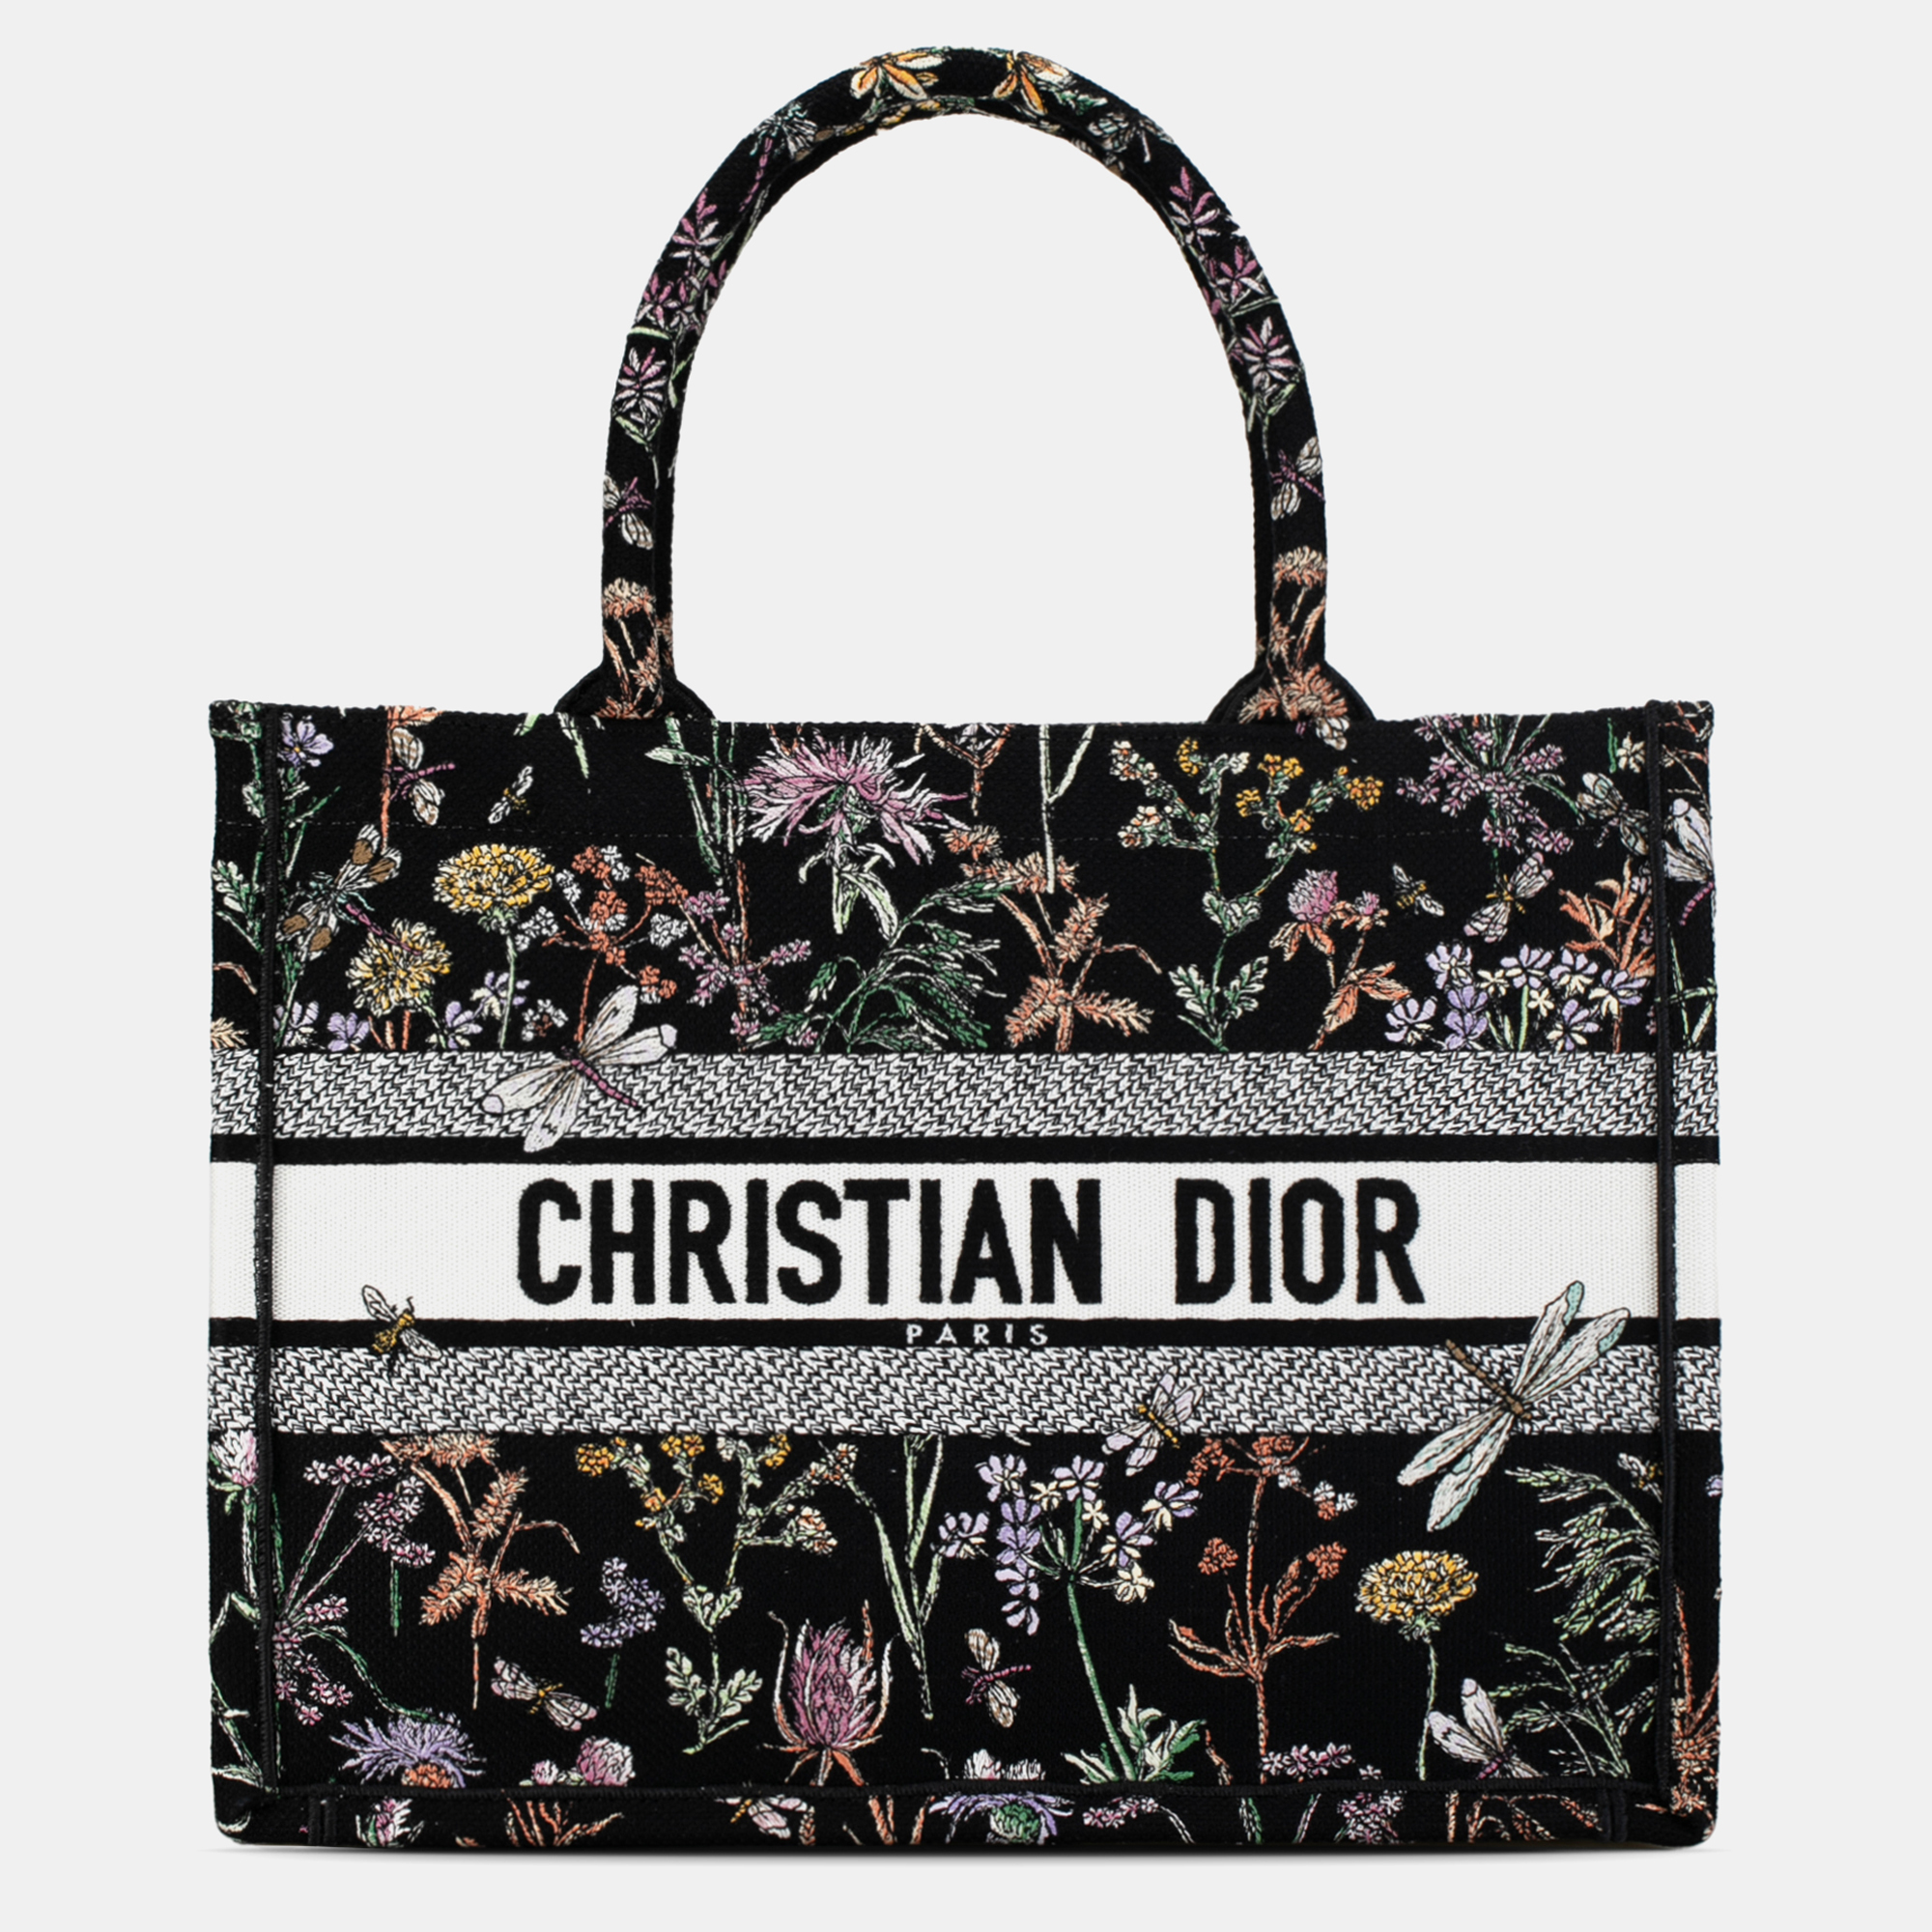 Elevate your style with an exquisite Dior bag. This timeless masterpiece is crafted from high grade materials adorned with iconic Dior motifs and features meticulous craftsmanship for luxury and sophistication.